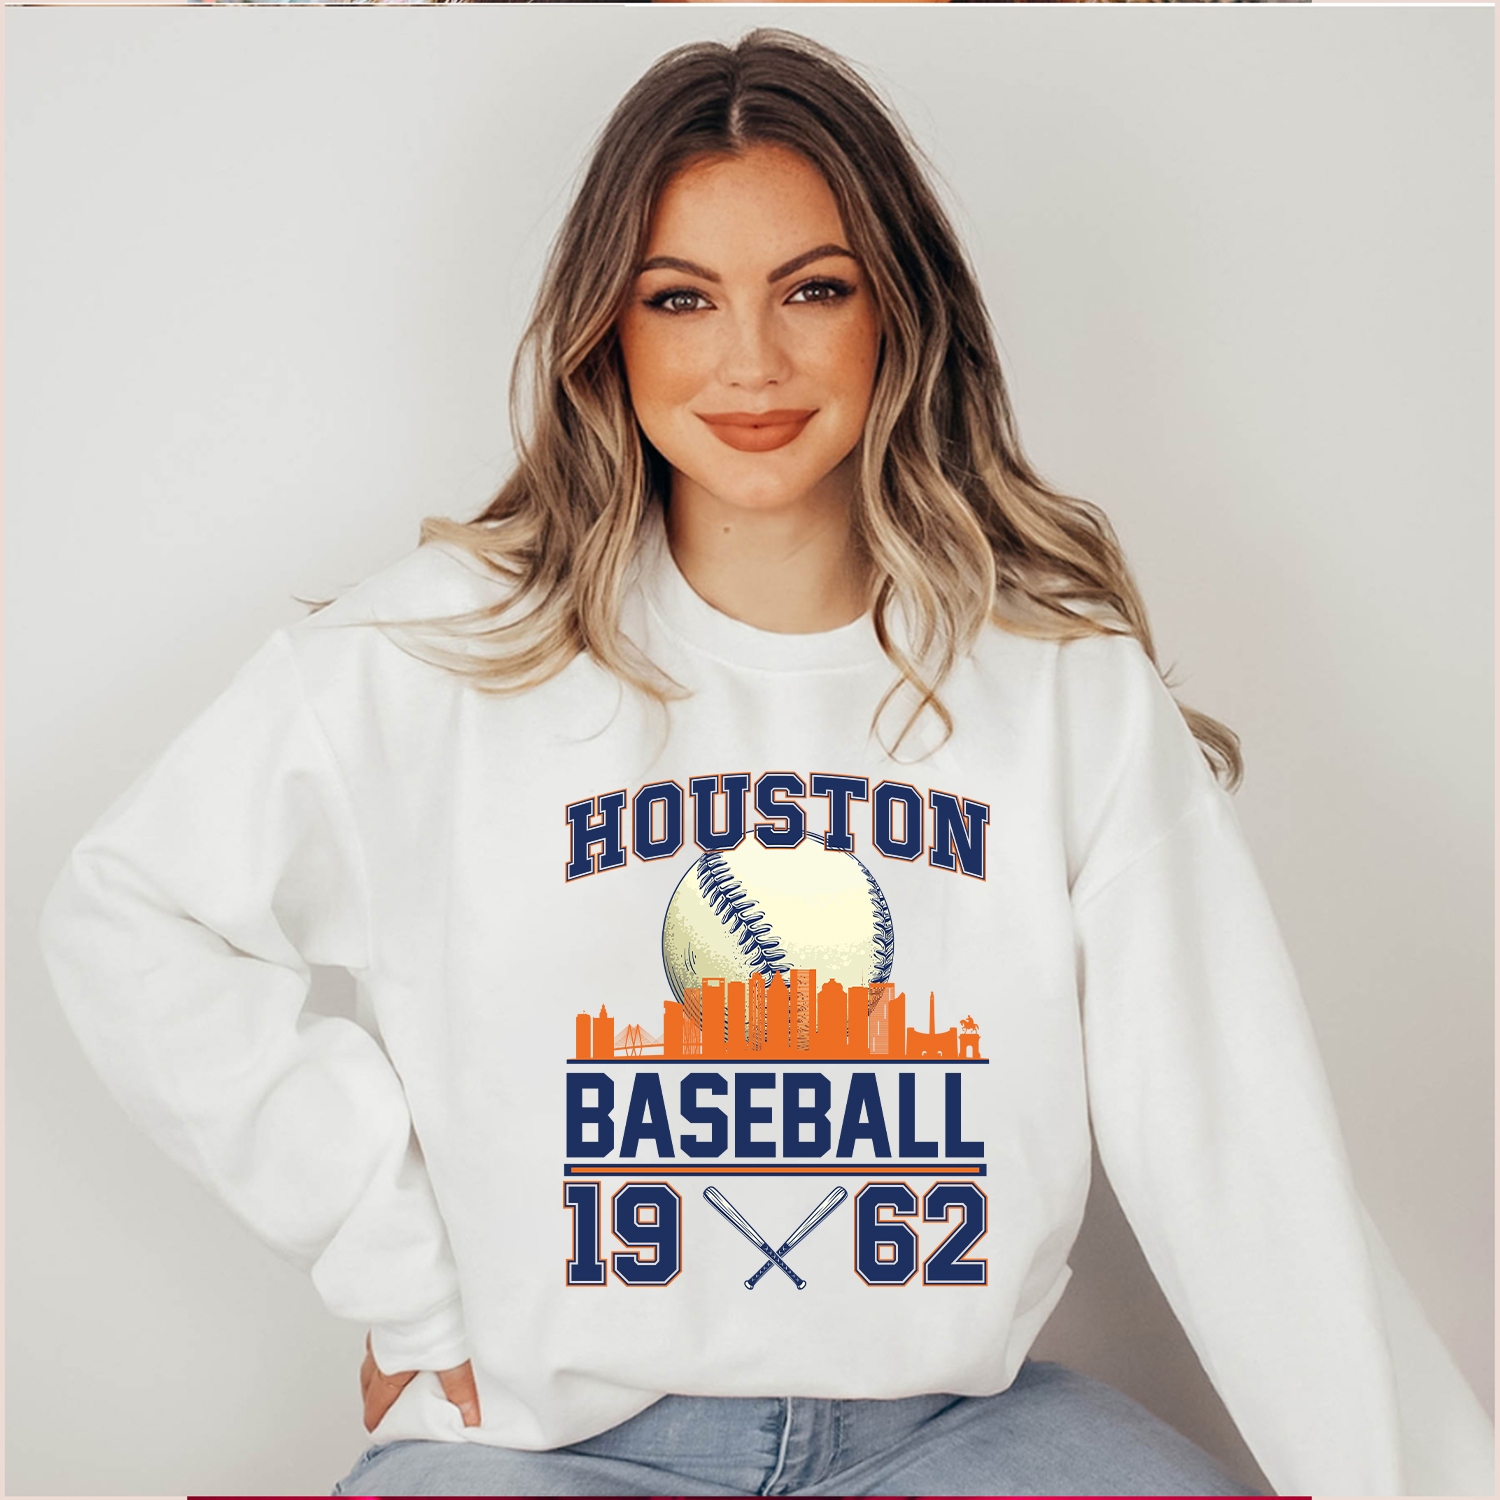 Houston Astros Vintage Shirt, Astros Fan Shirts, Gifts for Houston